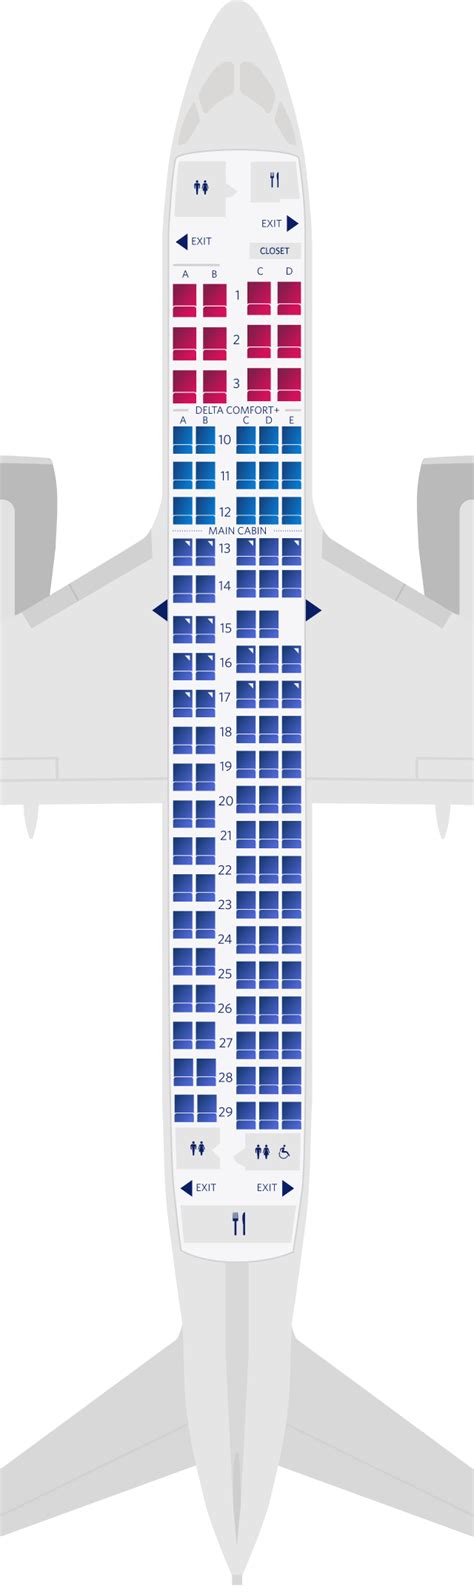 Airbus A Seating Chart Image To U